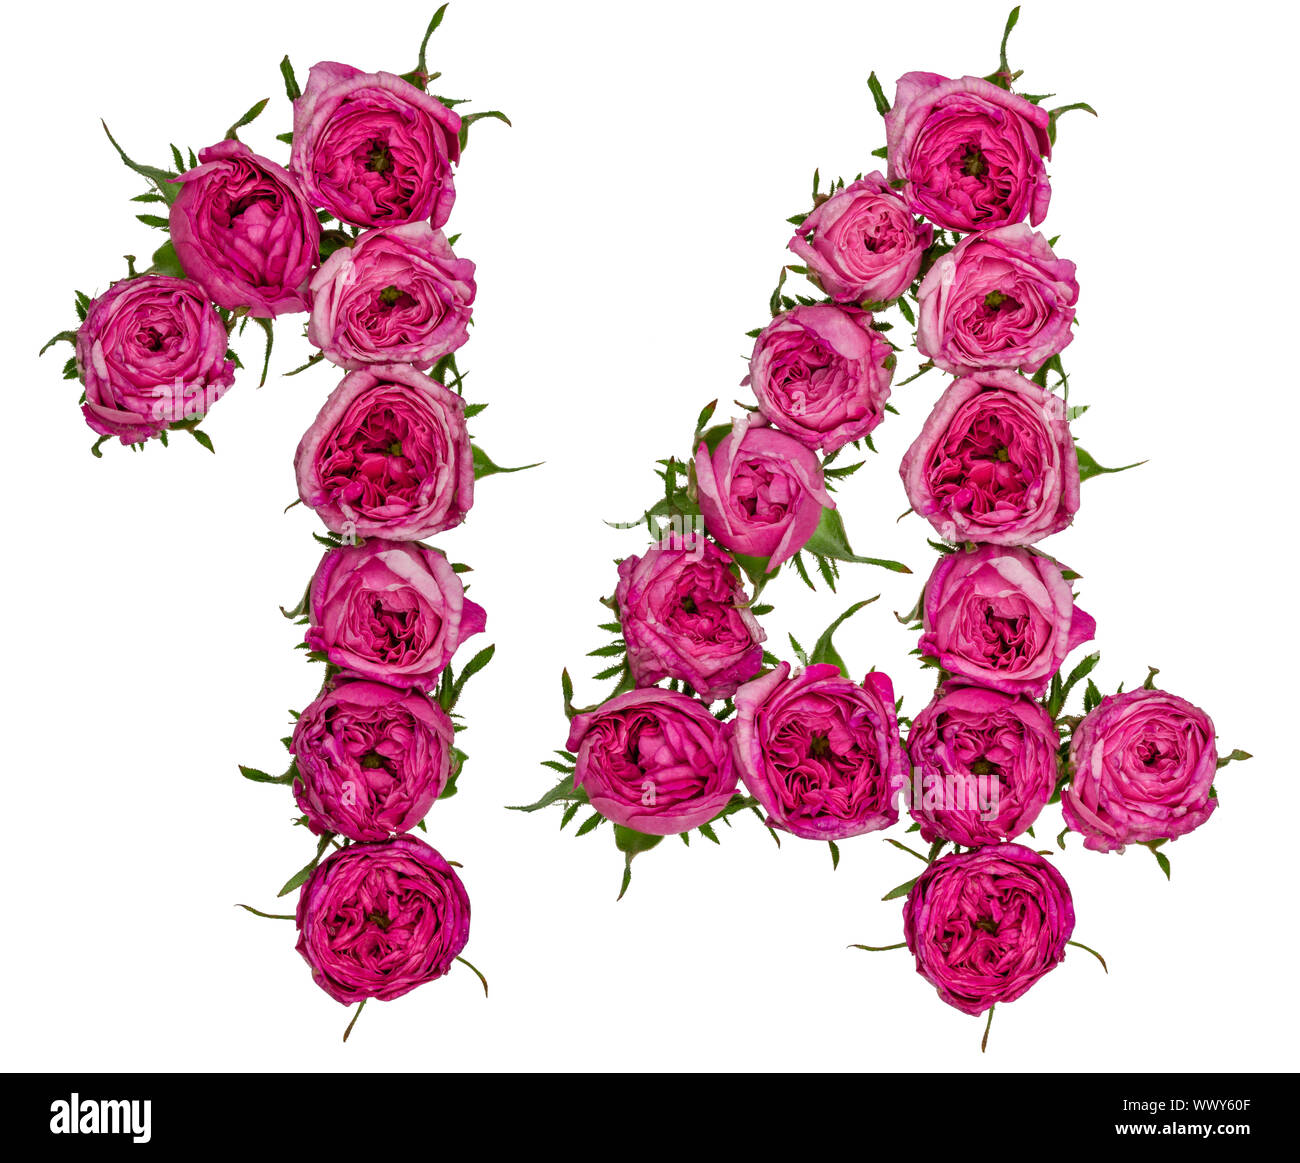 Arabic numeral 14, fourteen, from red flowers of rose, isolated on white  background Stock Photo - Alamy